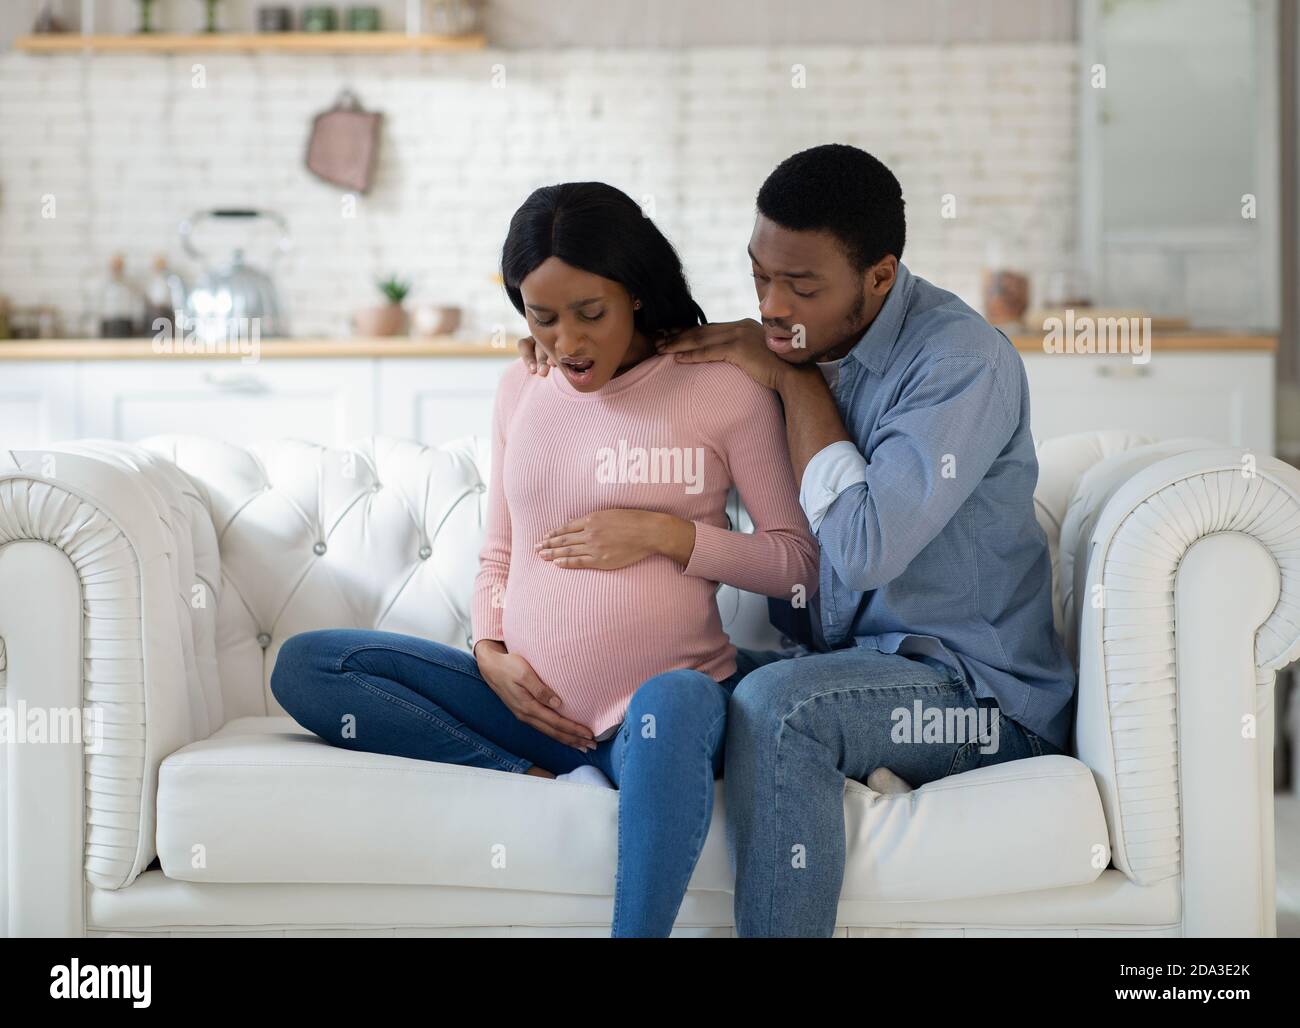 Baby Daywater Birth Pregnant Black Woman Stock Photo - Download Image Now -  Midwife, Water Birth, Home Birth - iStock